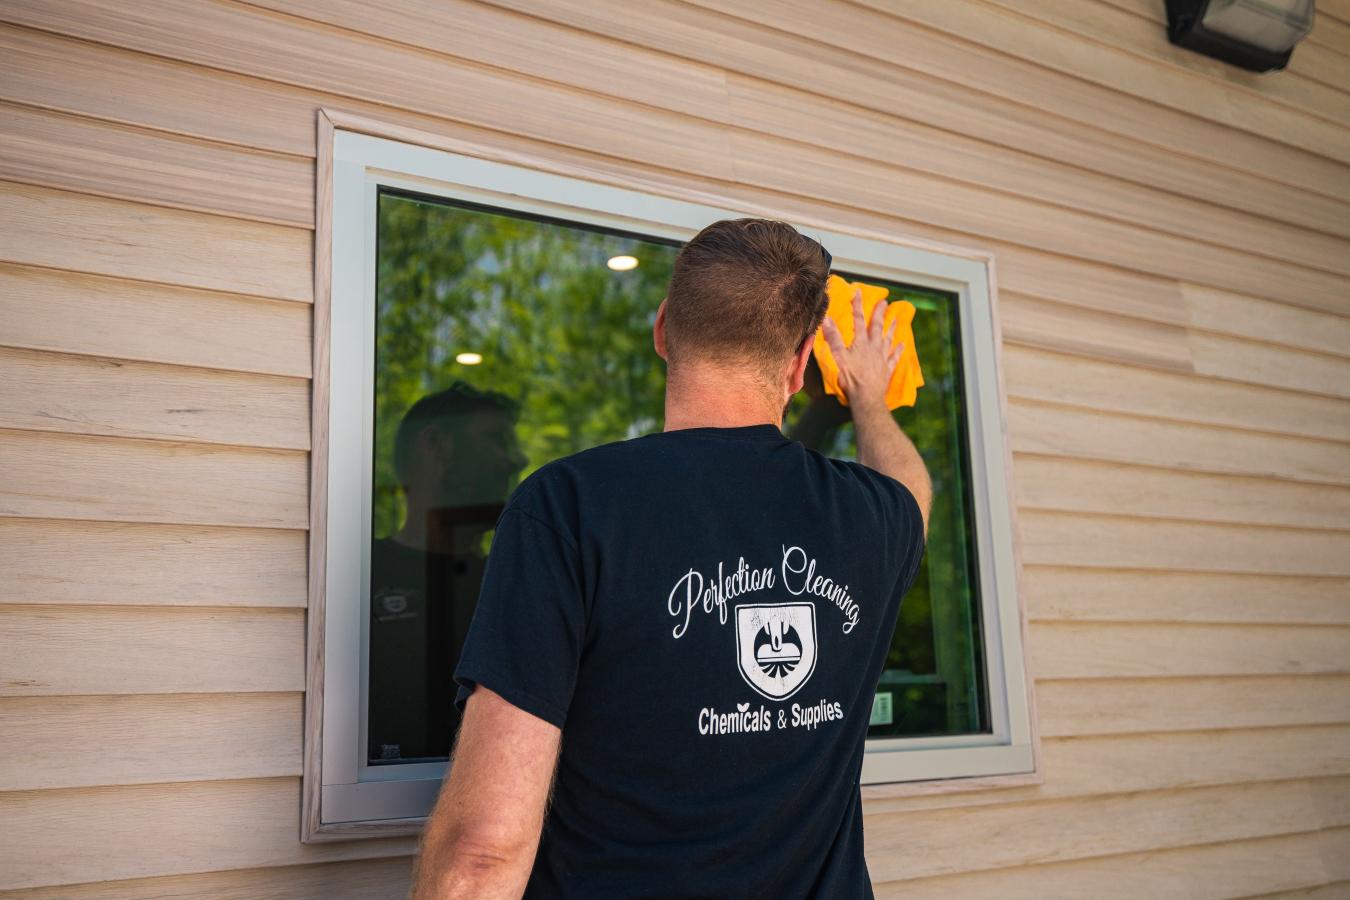 Ian Christensen, owner of Perfection Cleaning wearing a black branded shirt and washing an outer window at Adirondack Regional Federal Credit Union in Plattsburgh